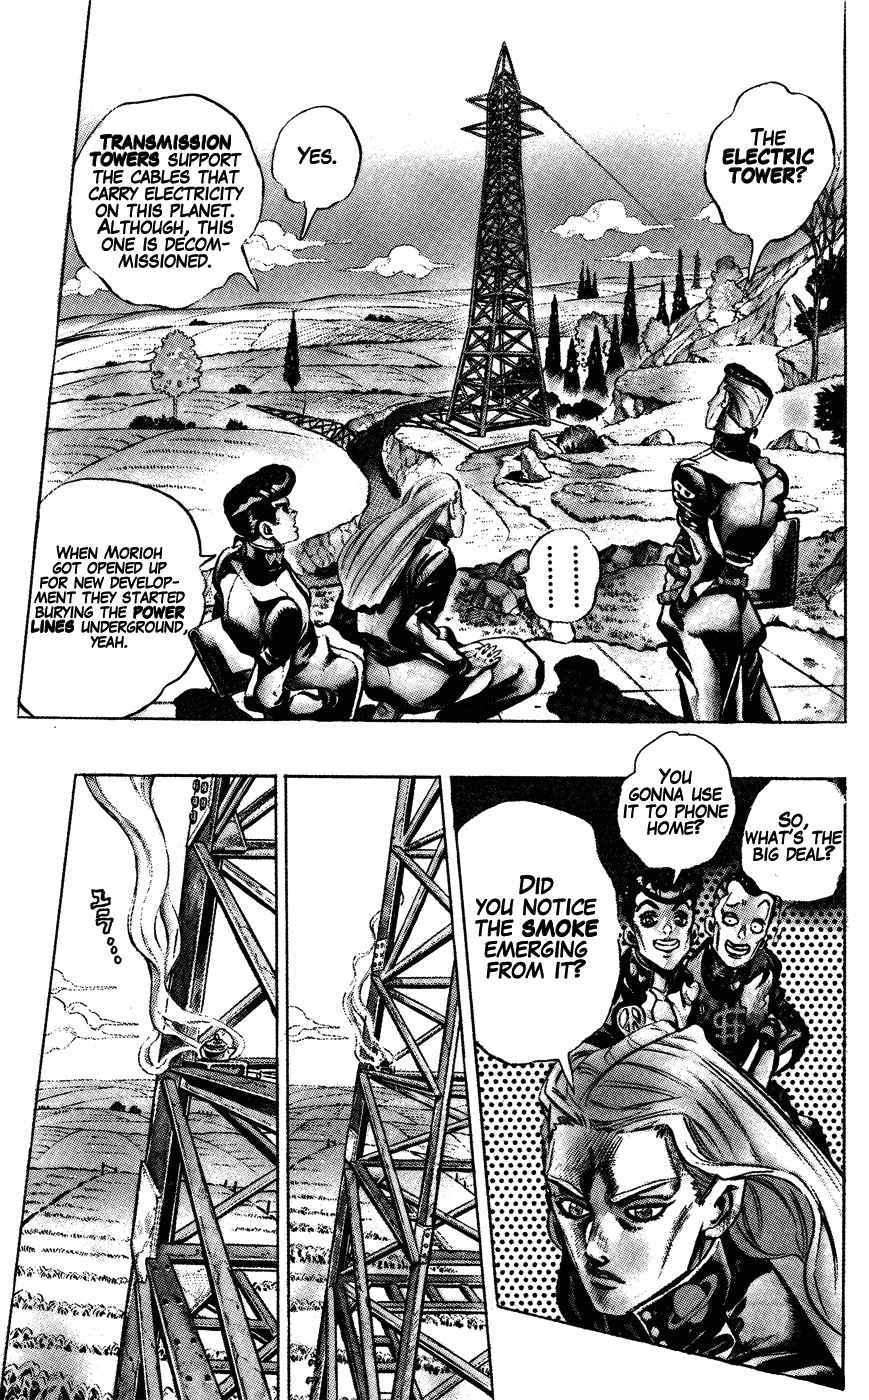 JoJo's Bizarre Adventure Part 4 Diamond is Unbreakable Vol. 14 Ch. 133 Who Wants to Live on a Transmission Tower? Part 1